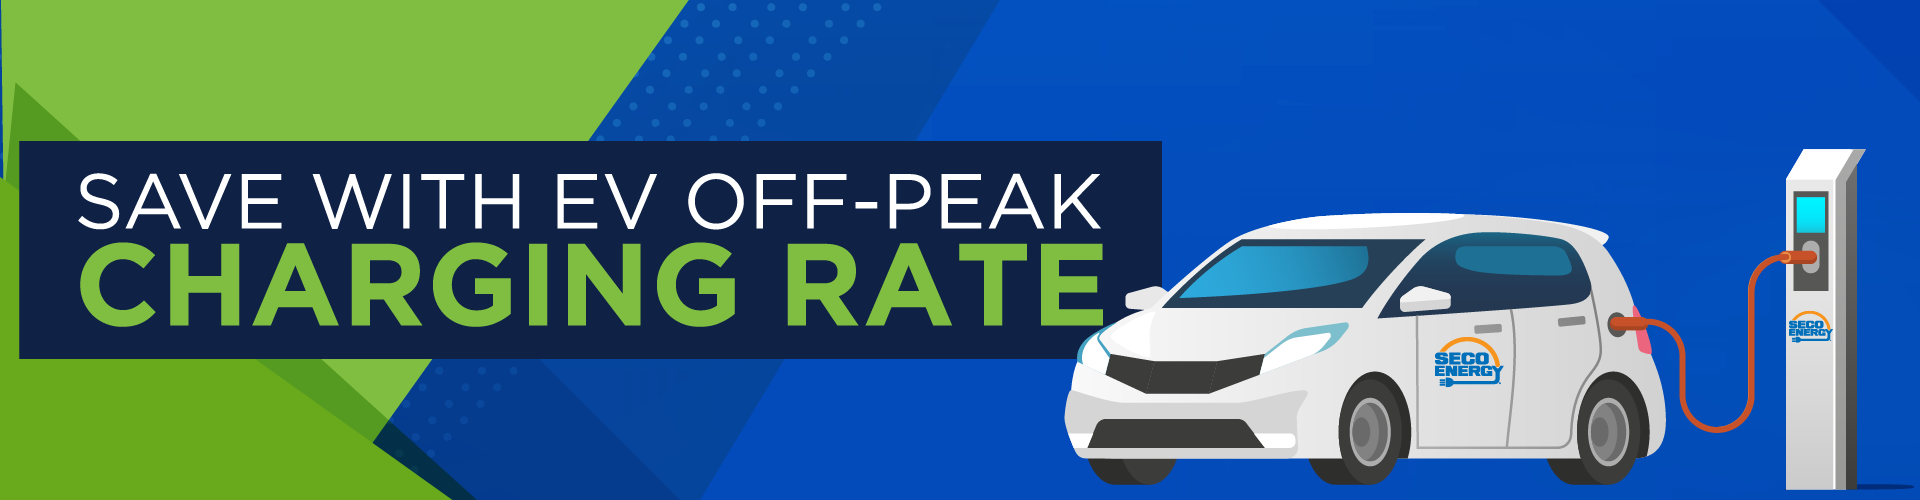 Save With EV Off-Peak Charging Rate